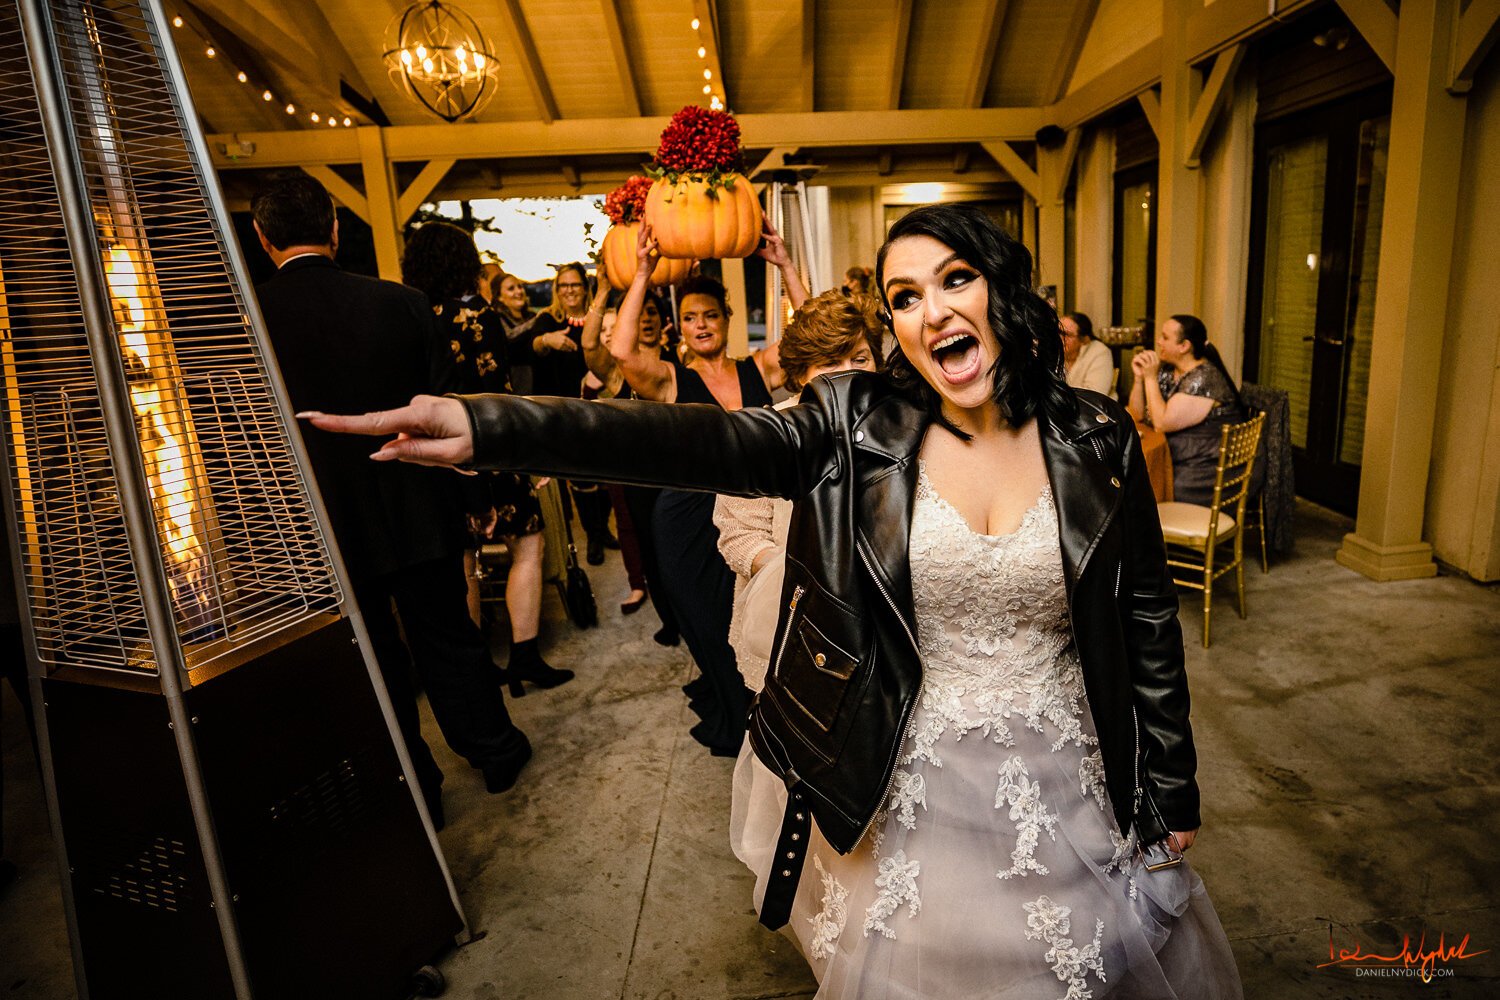 nj pinup goth bride in leather jacket having fun on the dance fl